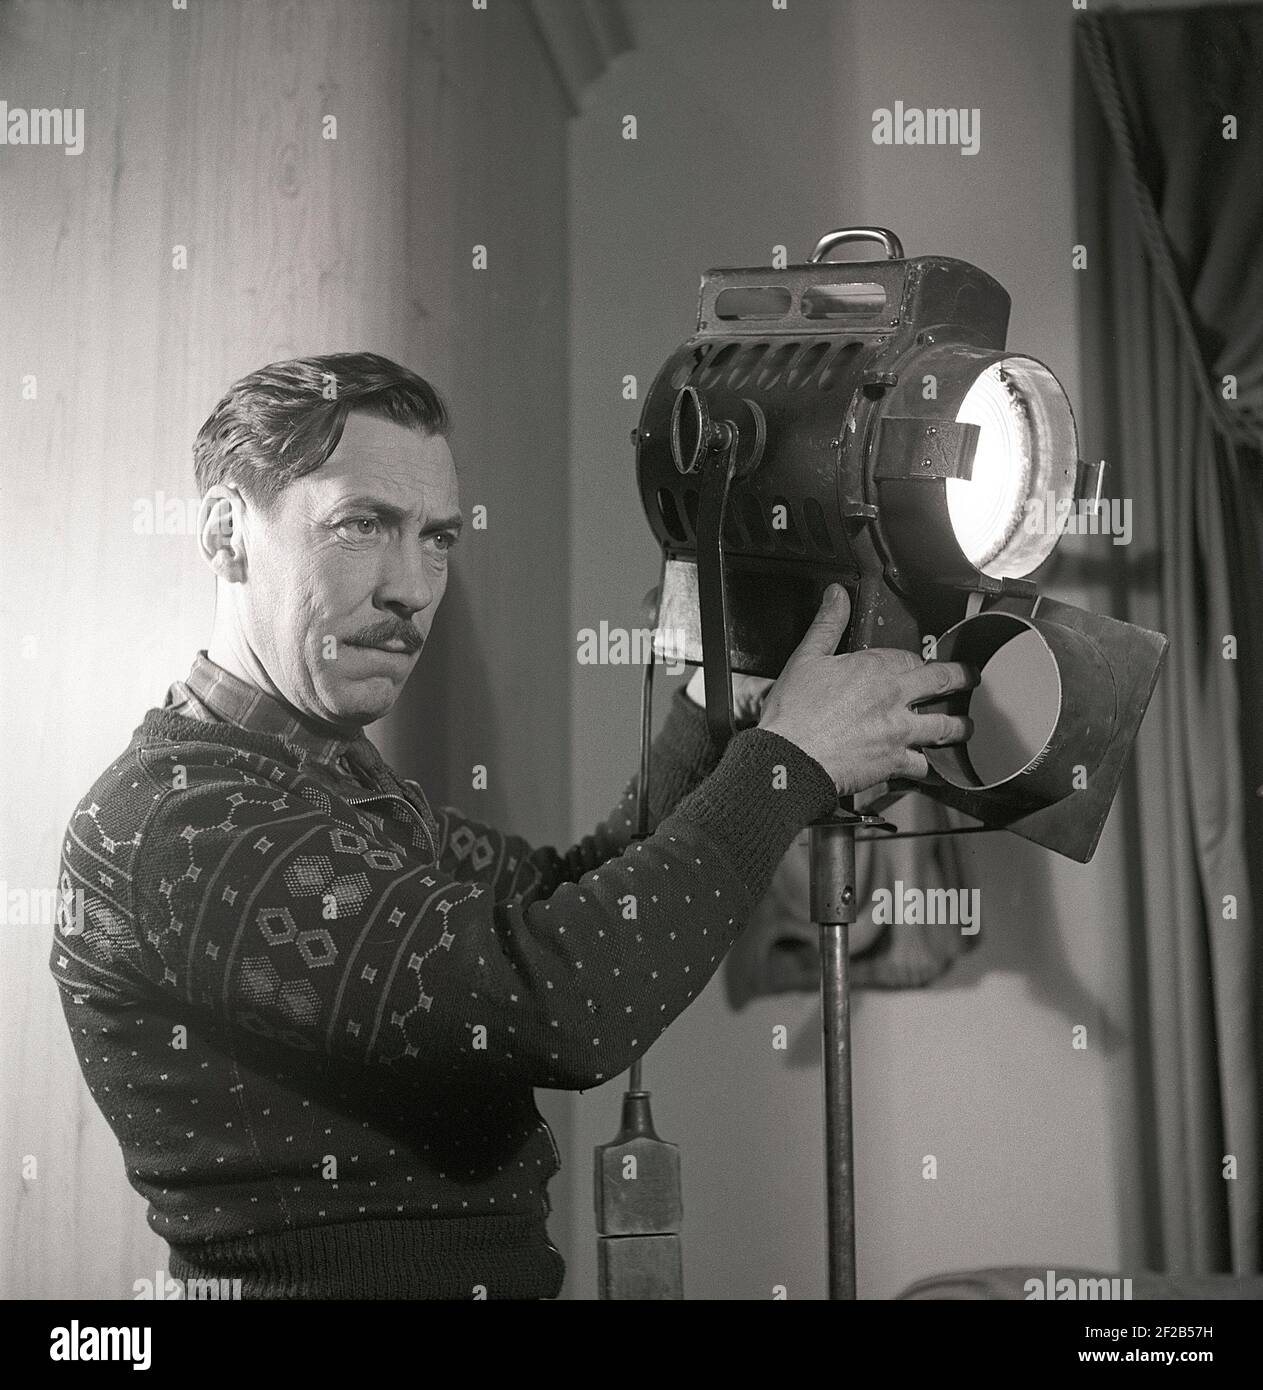 Film studio in the 1940s. A man working on the film set handles the lamp that is used to light the film scene during the filming of the movie Sjätte budet. Sweden 1947. ref AA6-1 Stock Photo